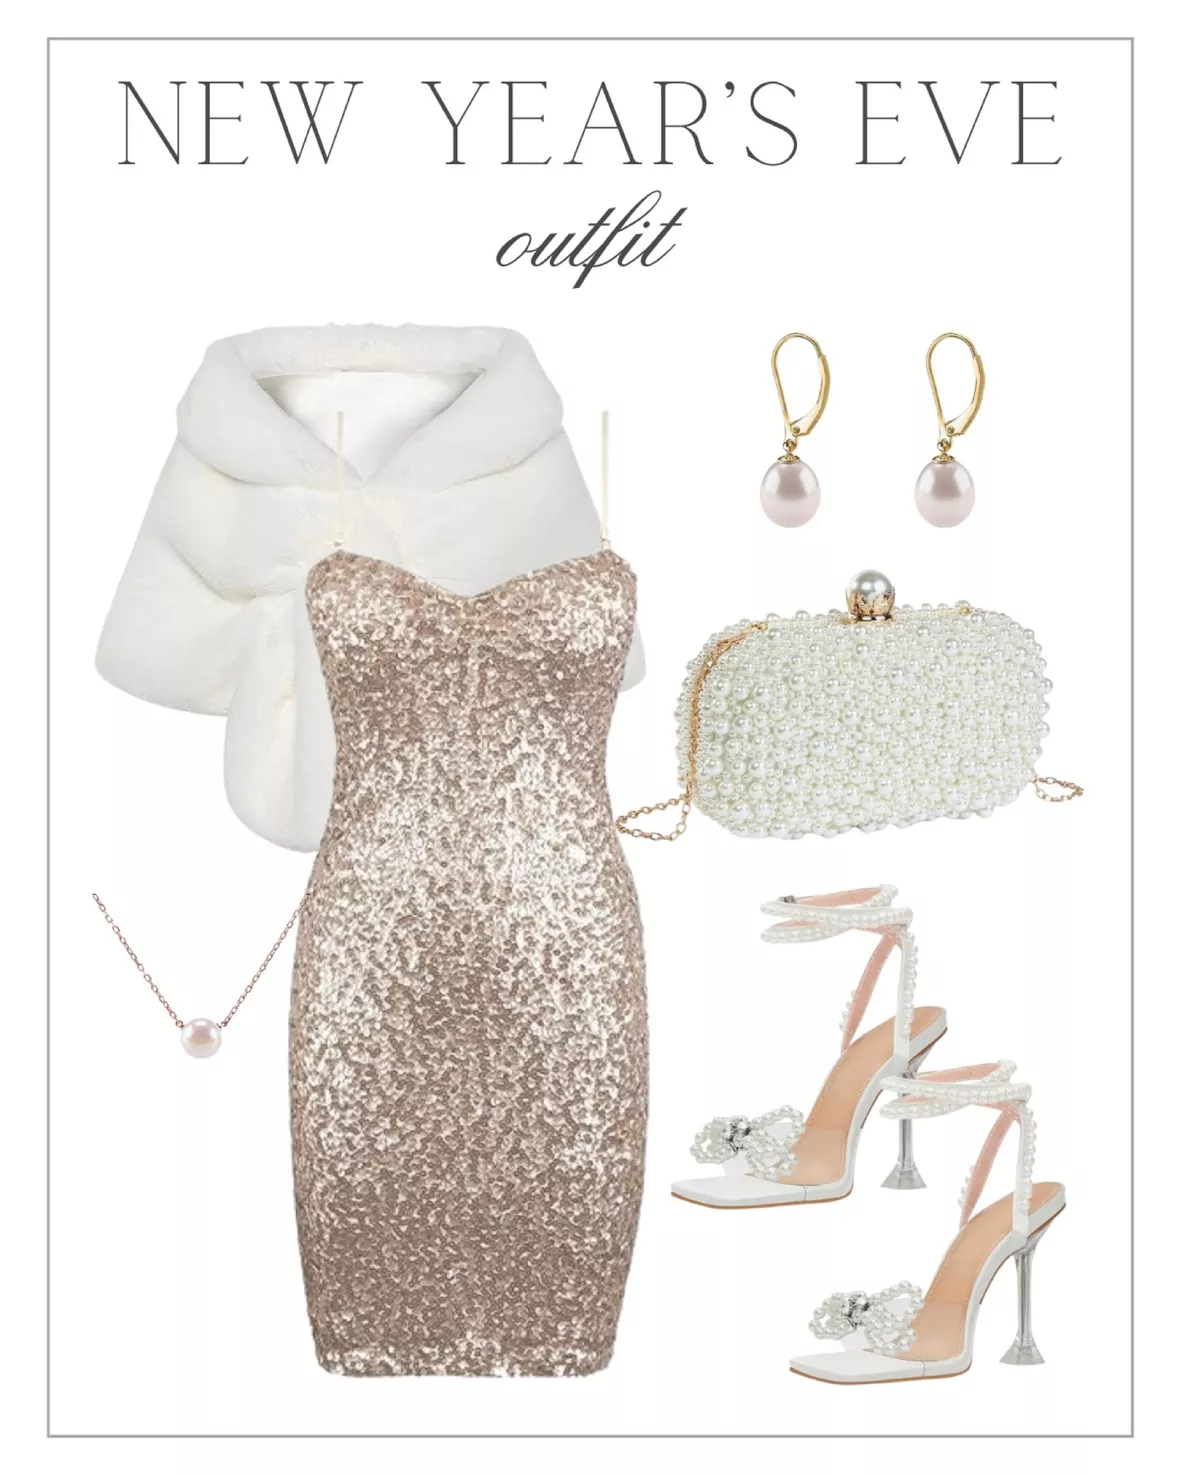 Dressy Holiday Party Outfit Ideas + Gifts ON SALE!